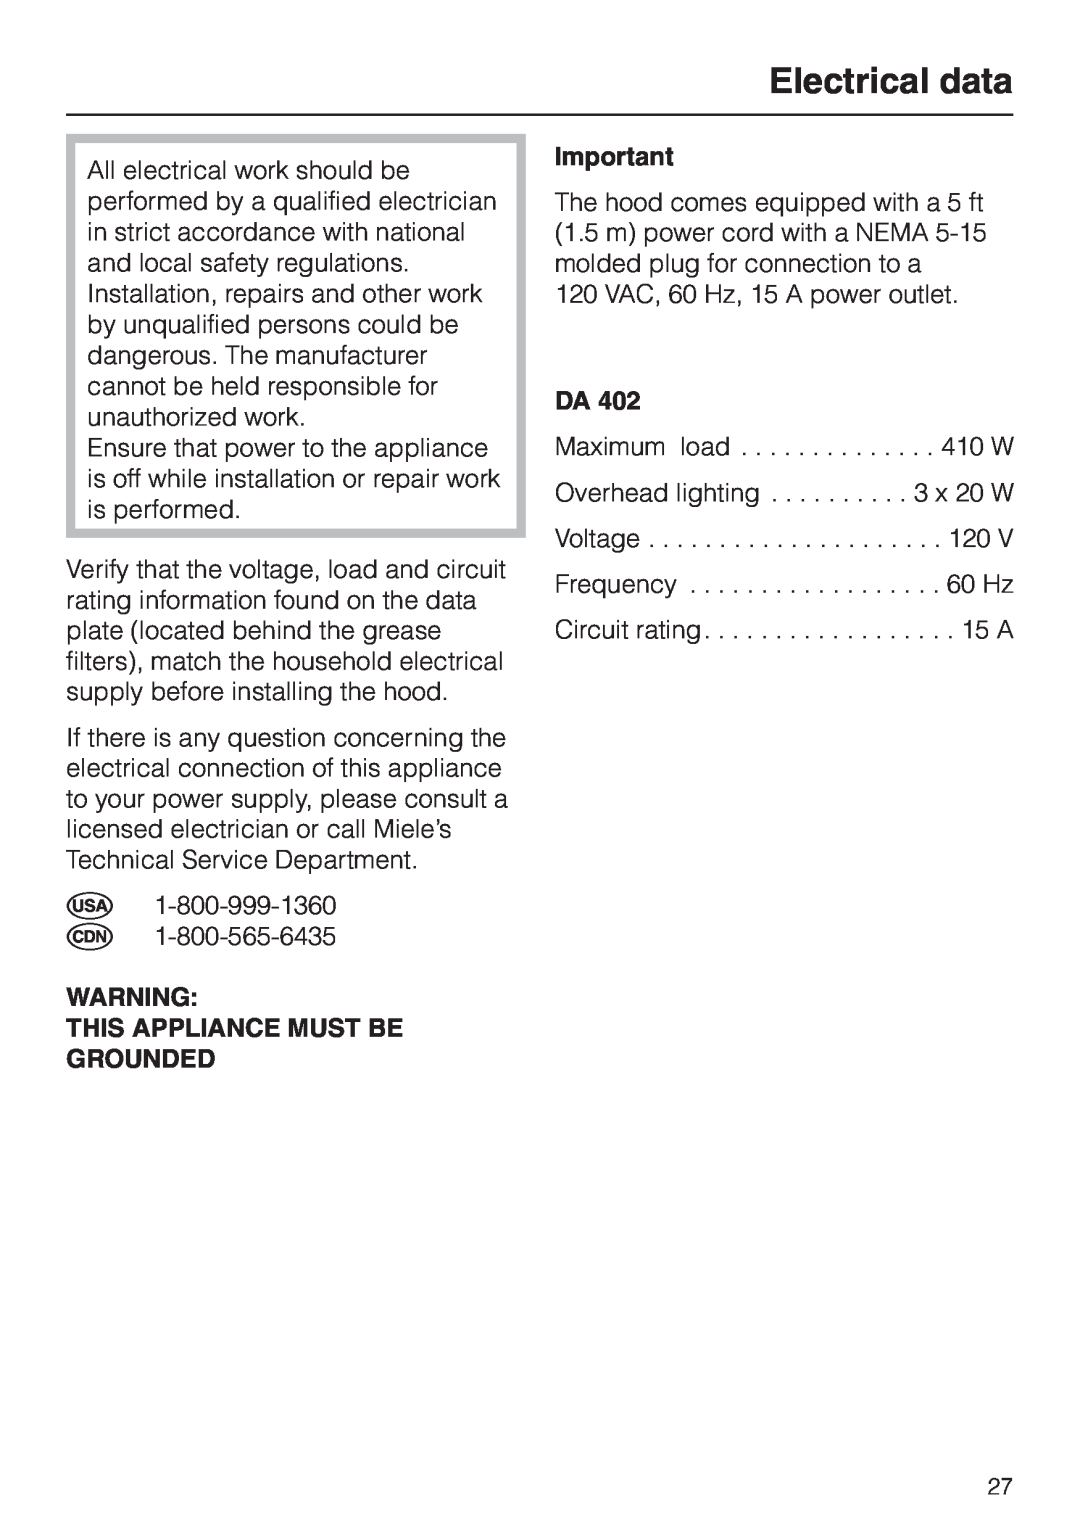 Miele DA 402 installation instructions Electrical data, This Appliance Must Be Grounded 